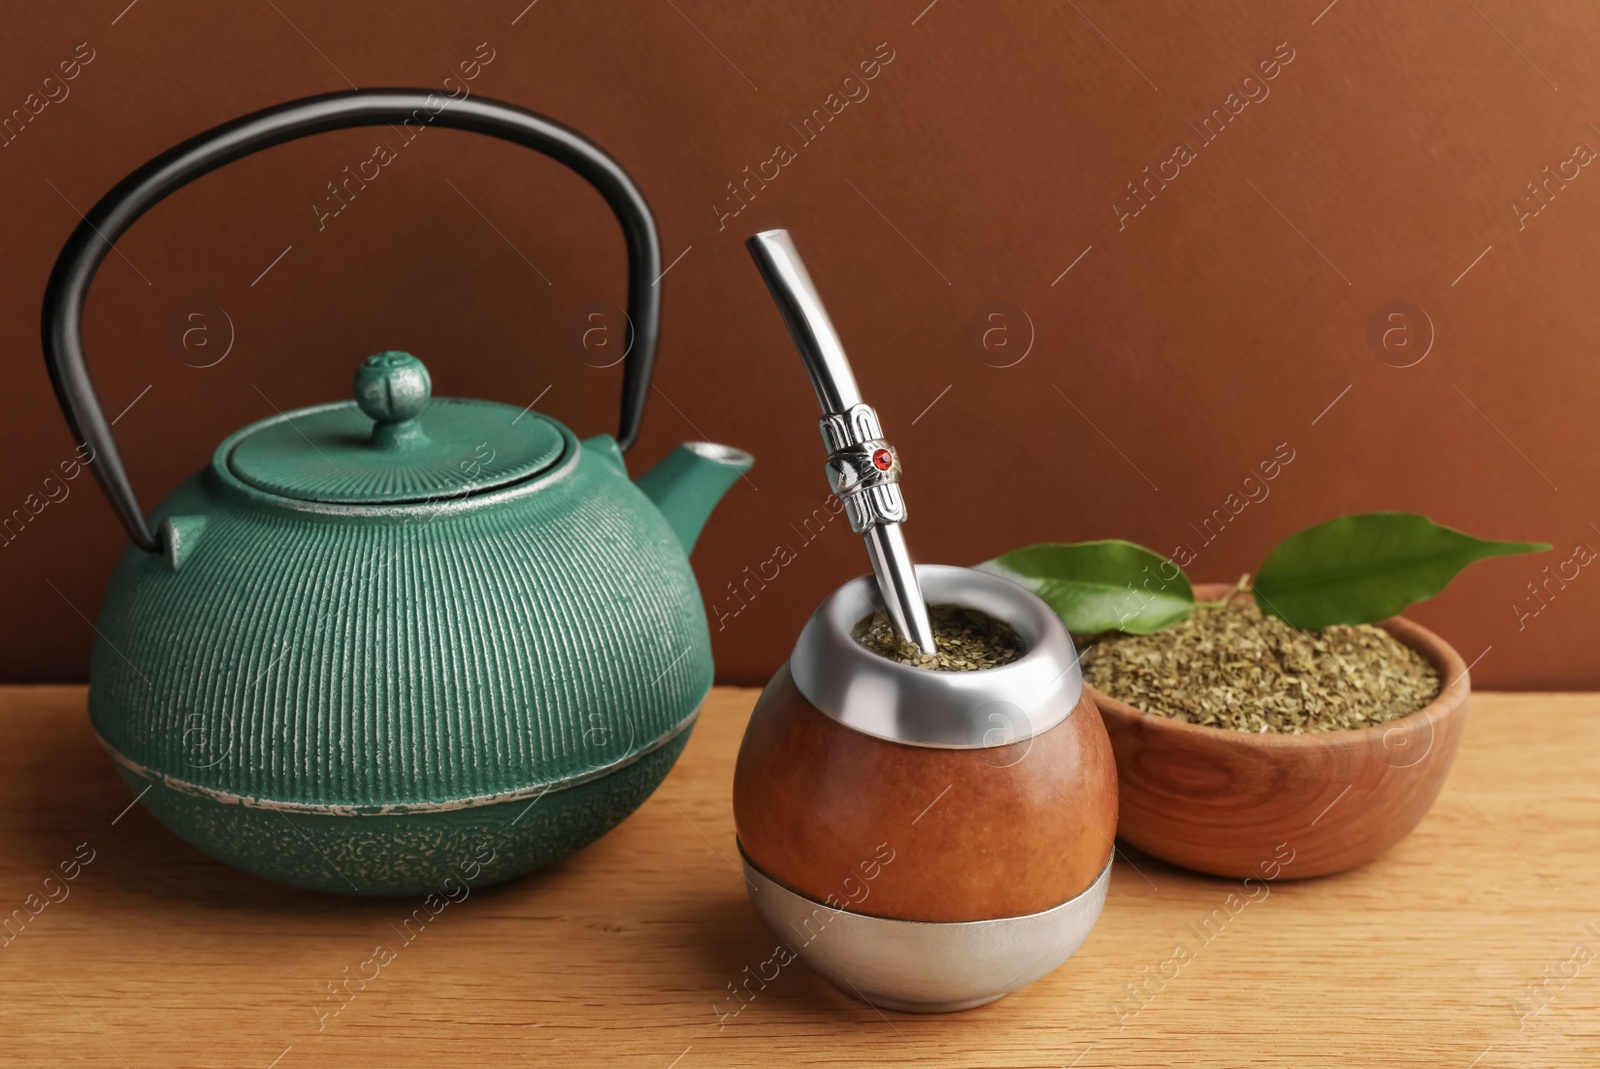 Photo of Calabash with mate tea, bombilla and teapot on wooden table